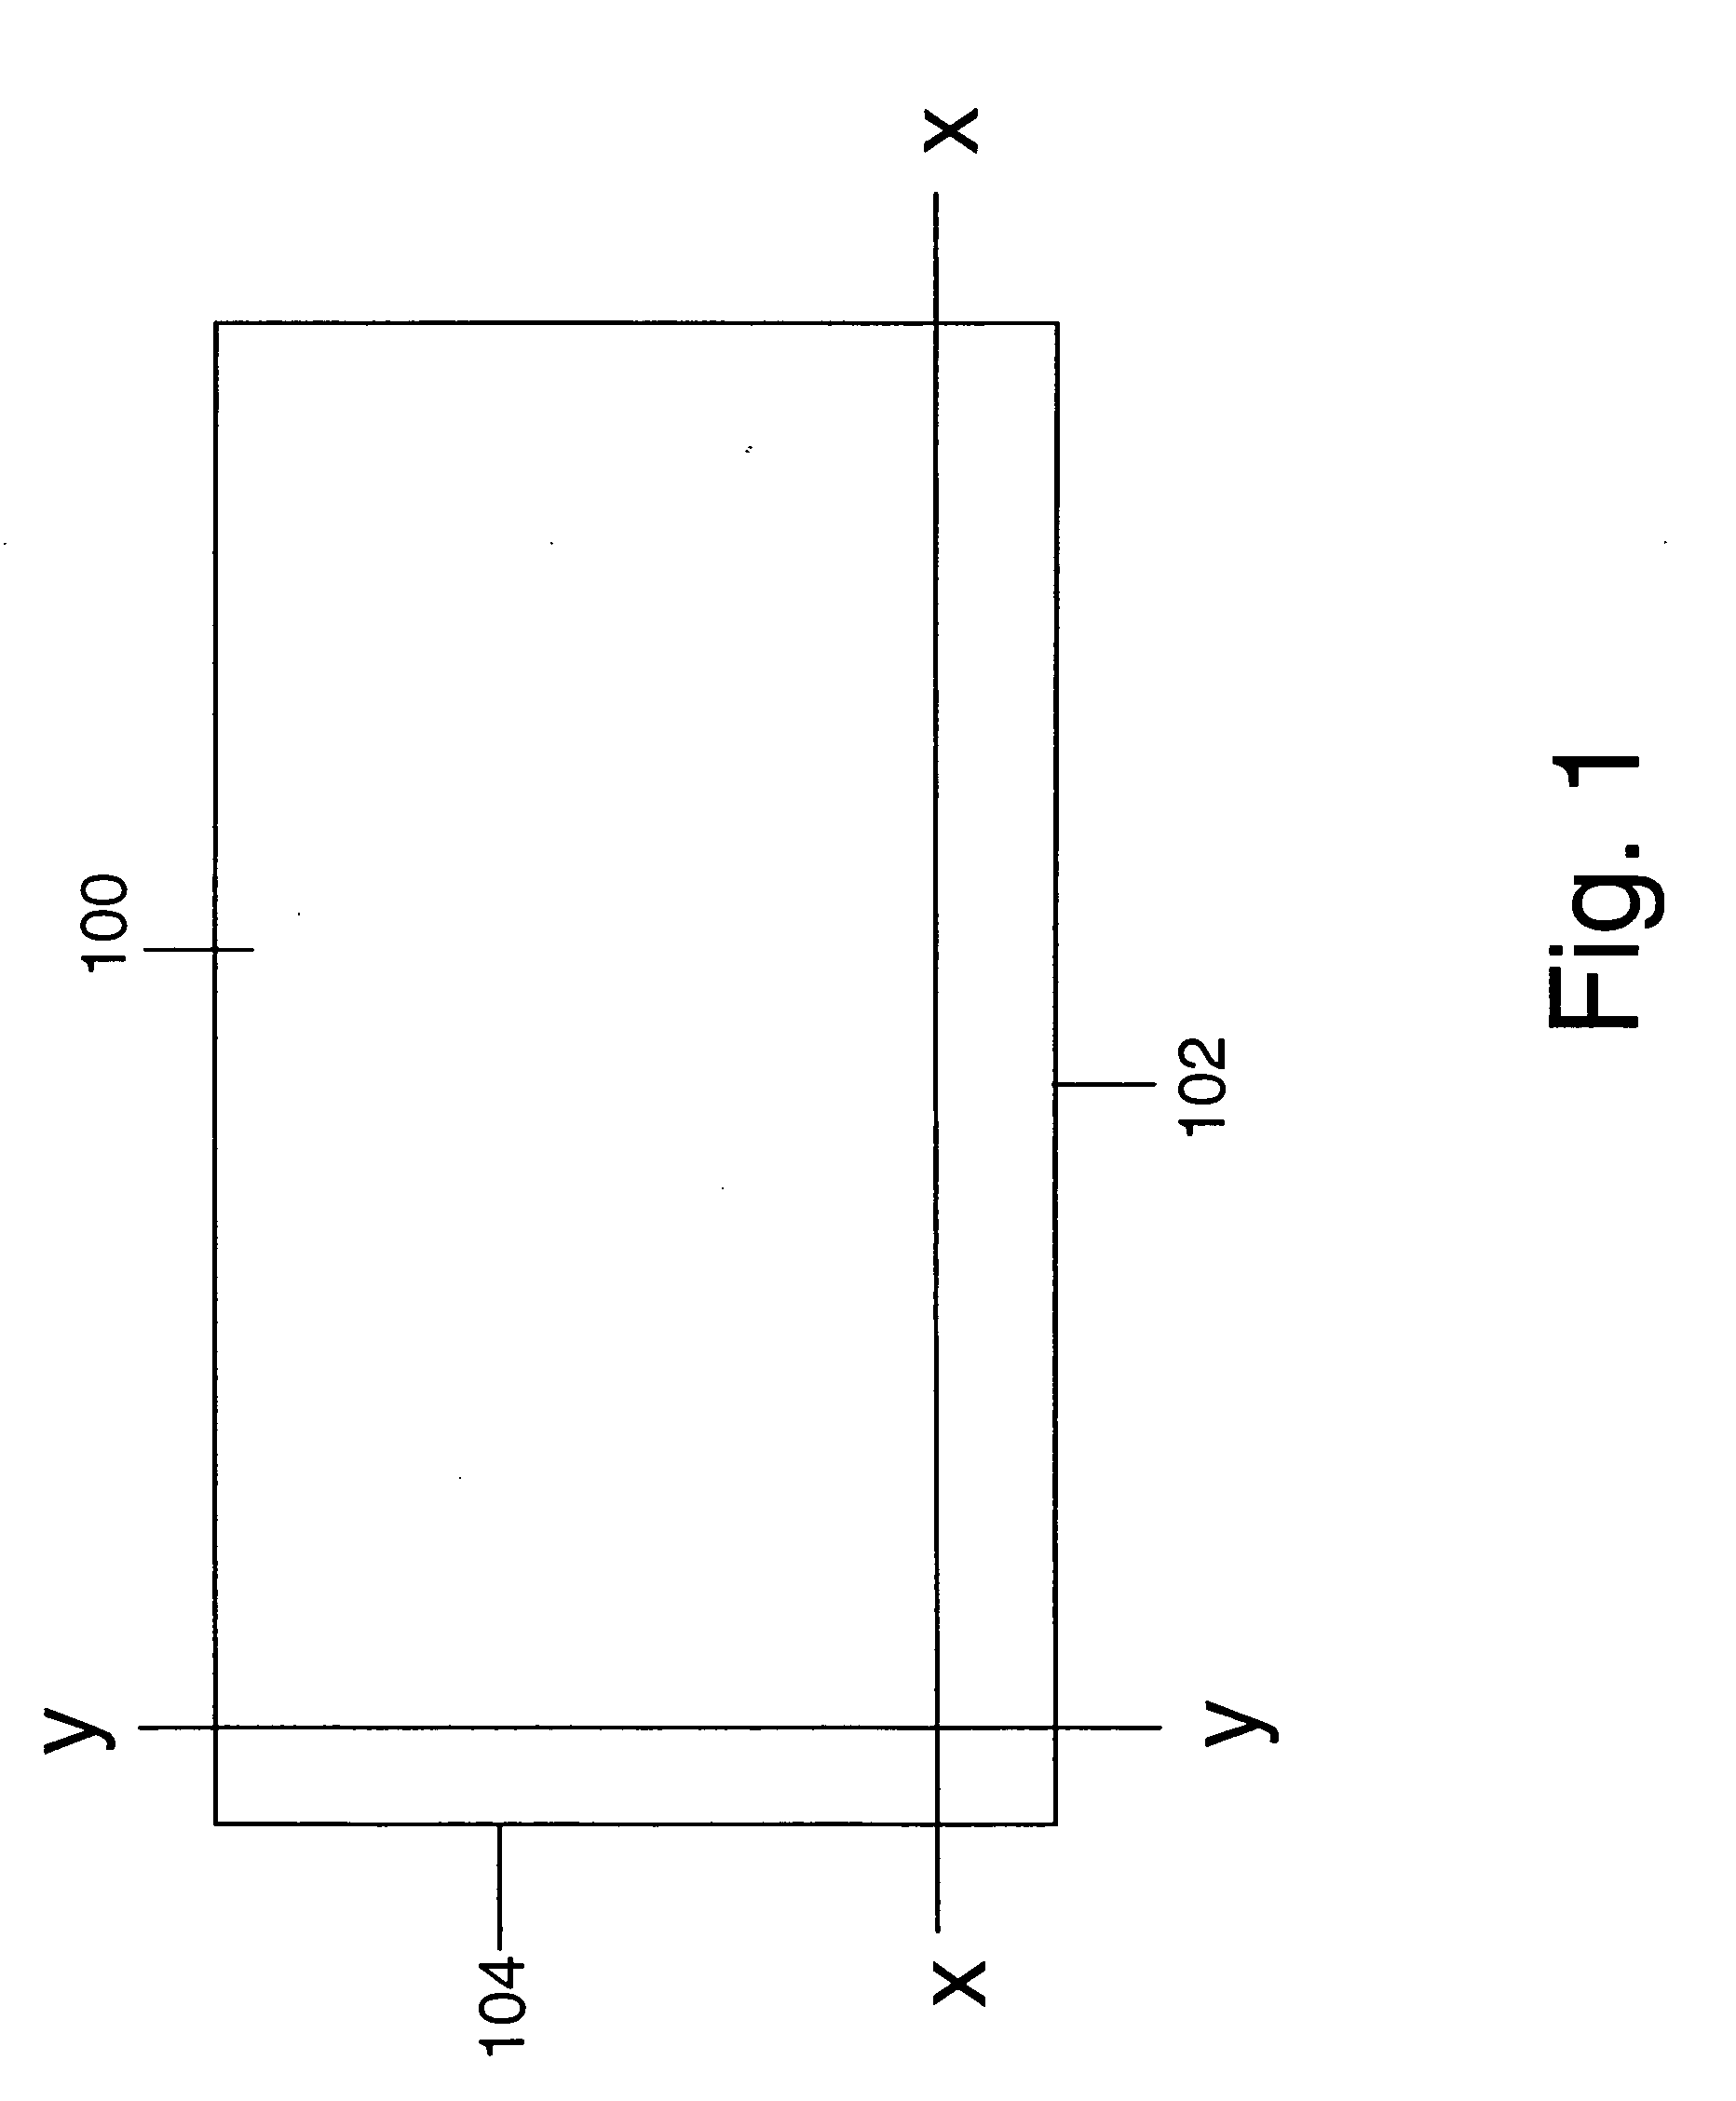 Connector assembly with integrated electromagnetic shield